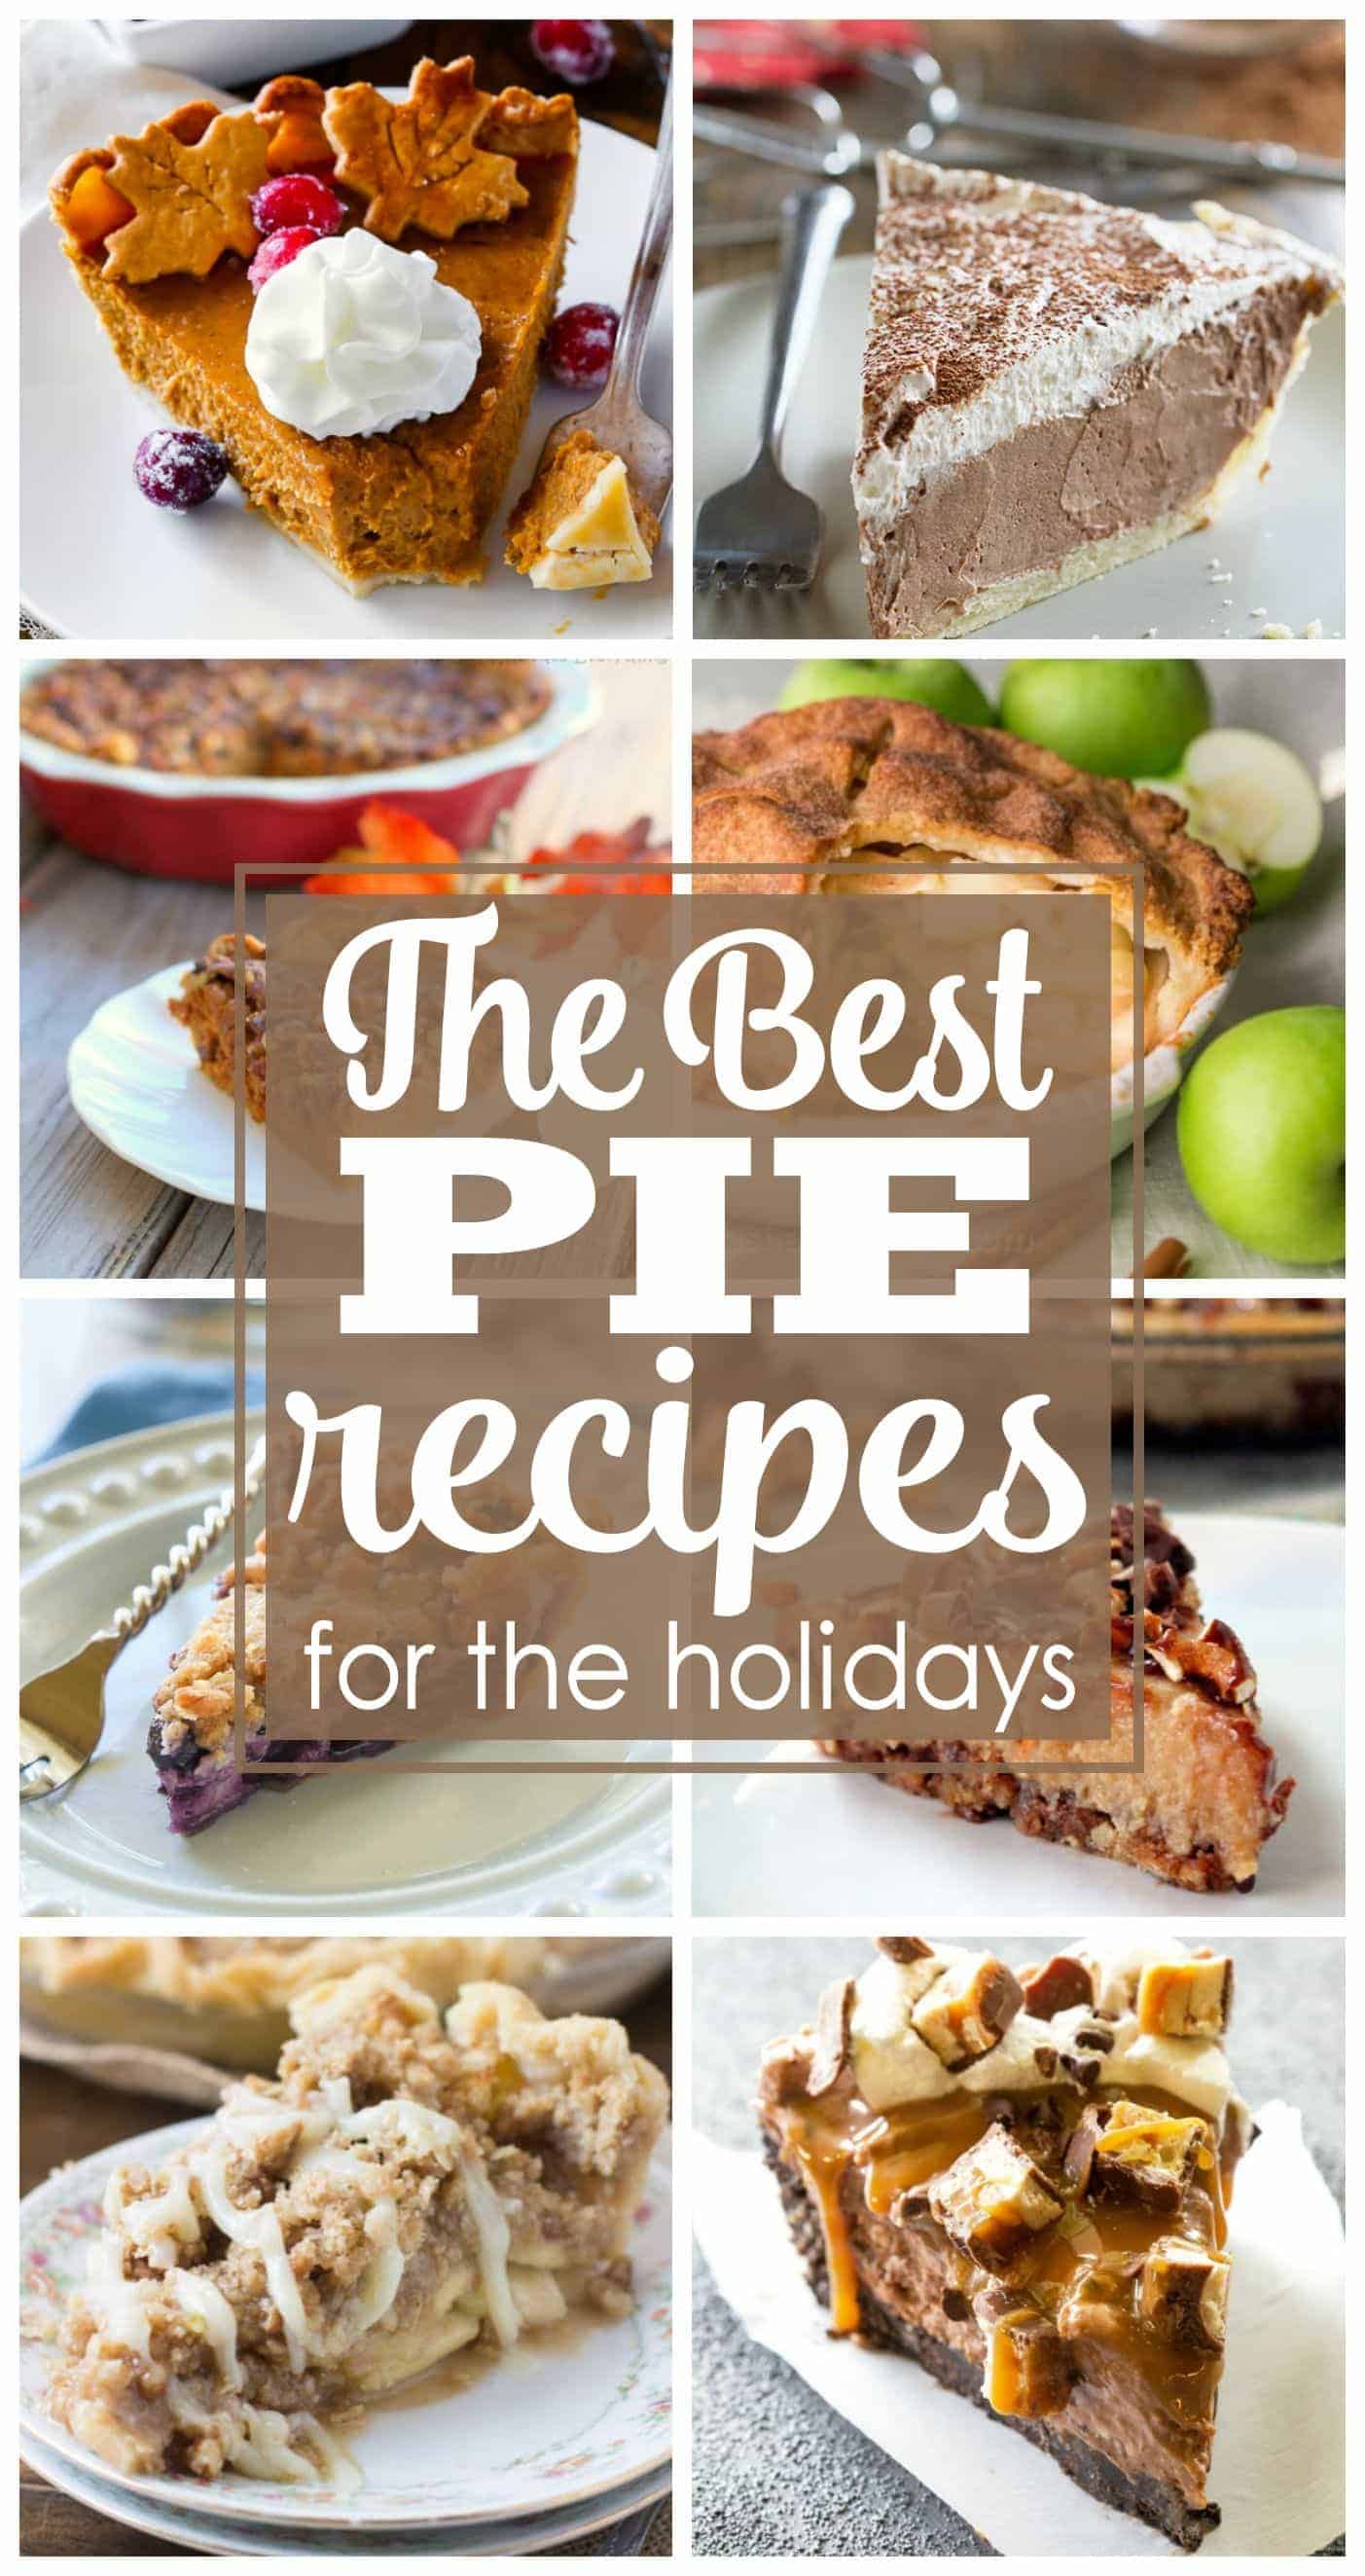 The best pie recipes for the holidays that you will want on your Thanksgiving and Christmas dessert table. Apple pie, Pumpkin Pie, Key Lime Pie and more.